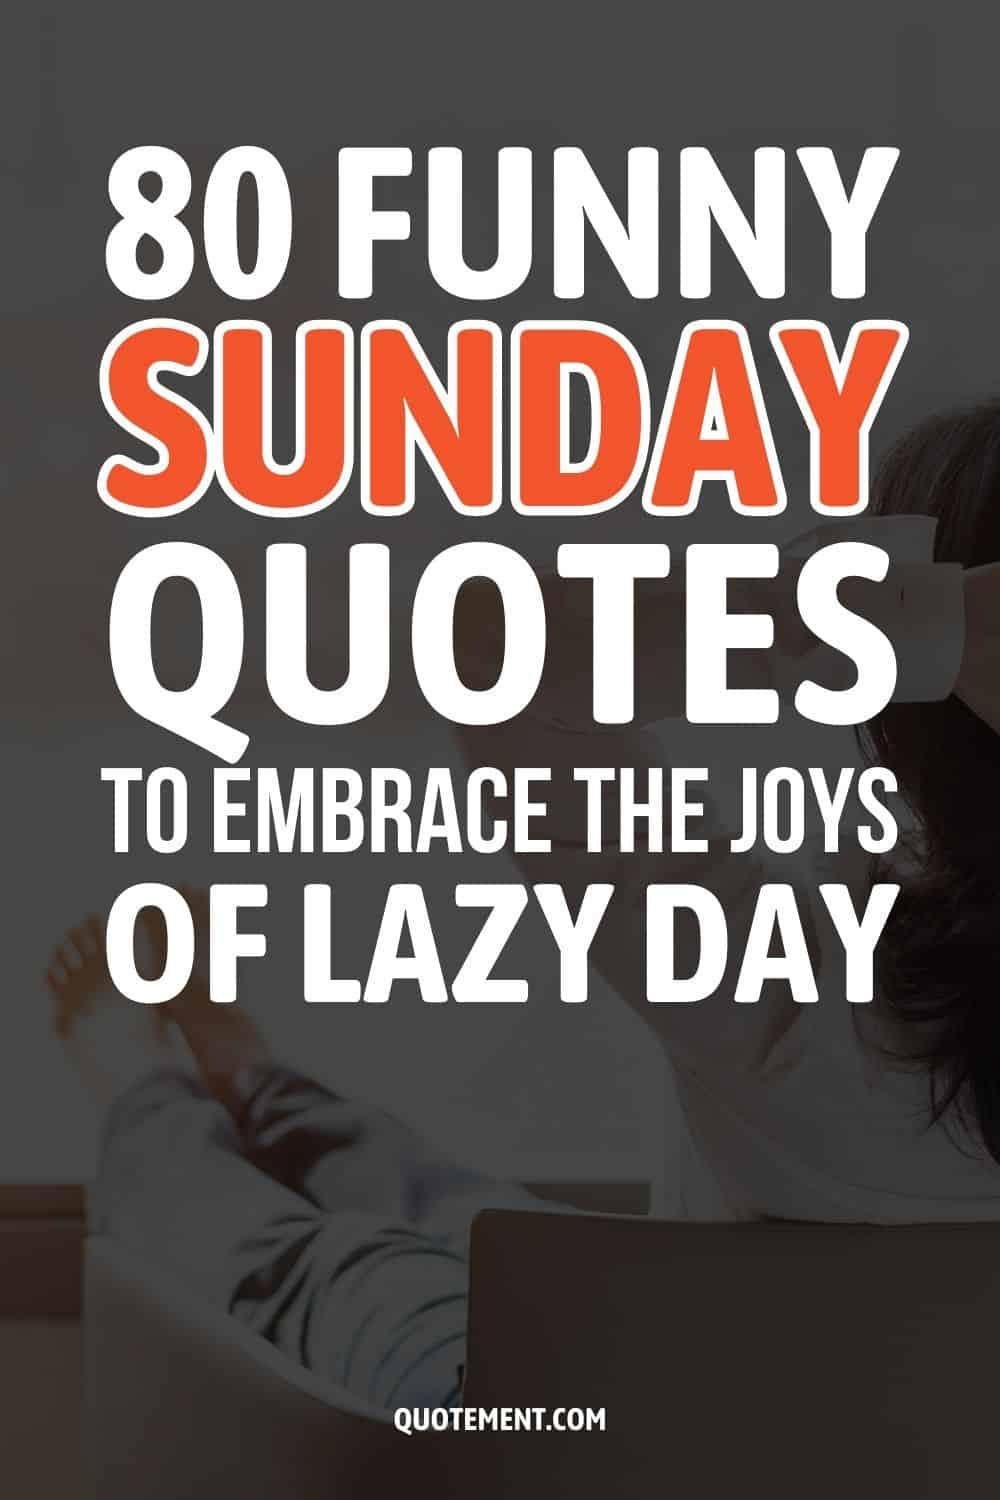 80 Funny Sunday Quotes To Embrace The Joys Of Lazy Day